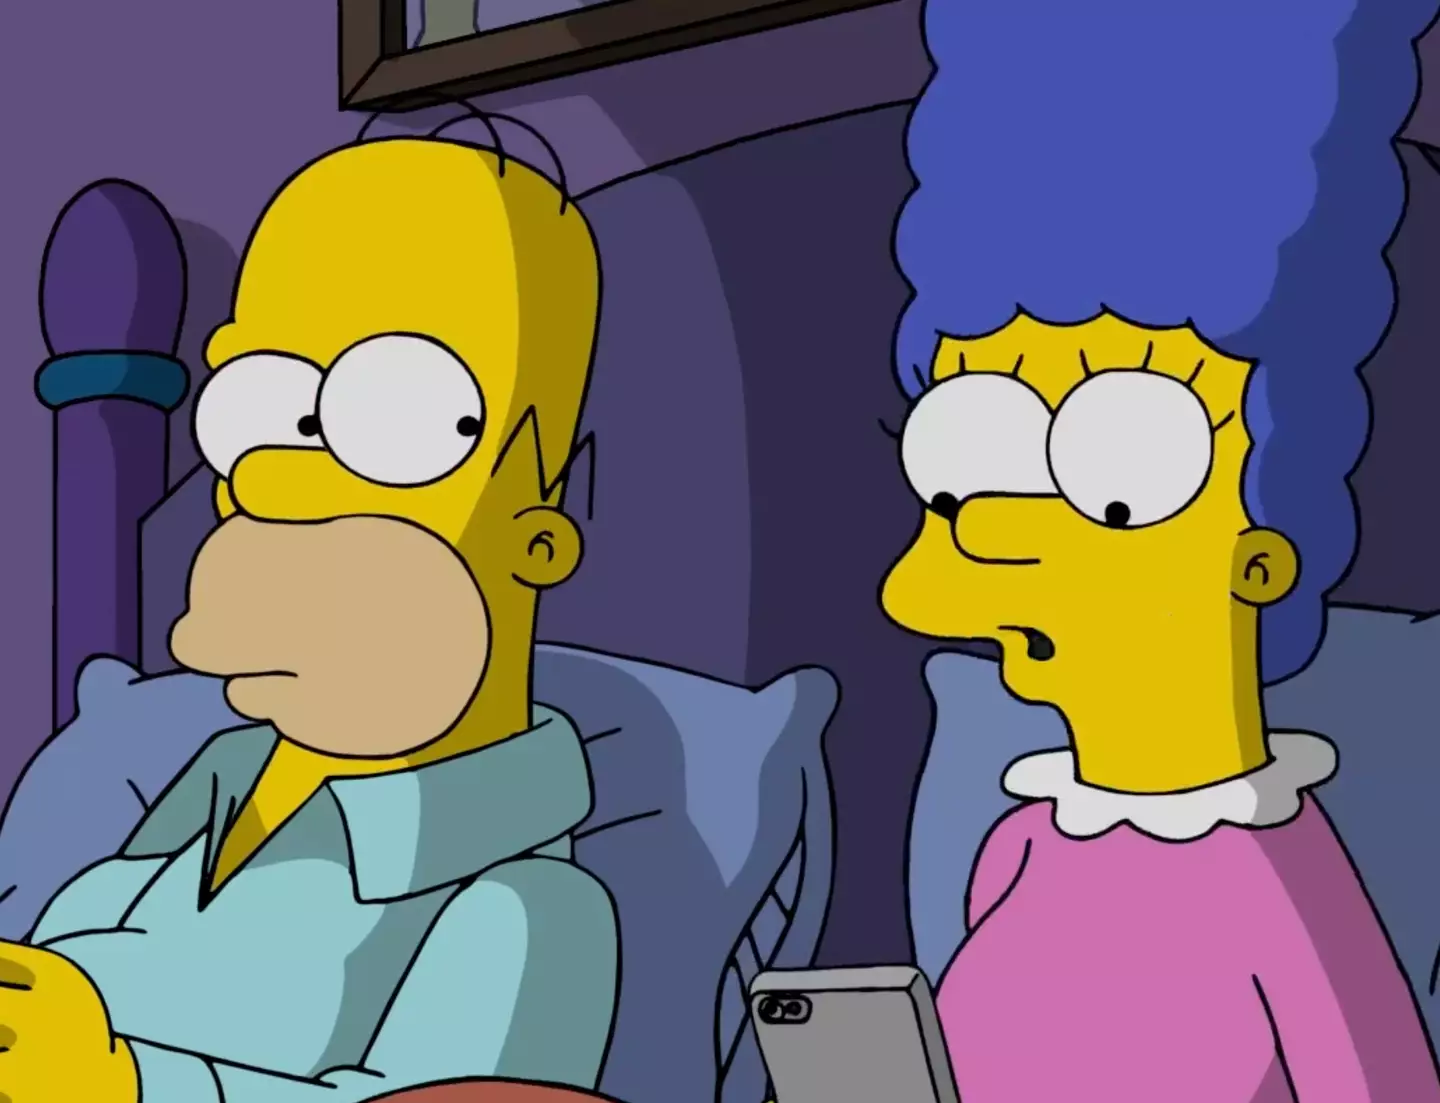 Marge's character has been voiced by Julie Kavner from the very beginning .